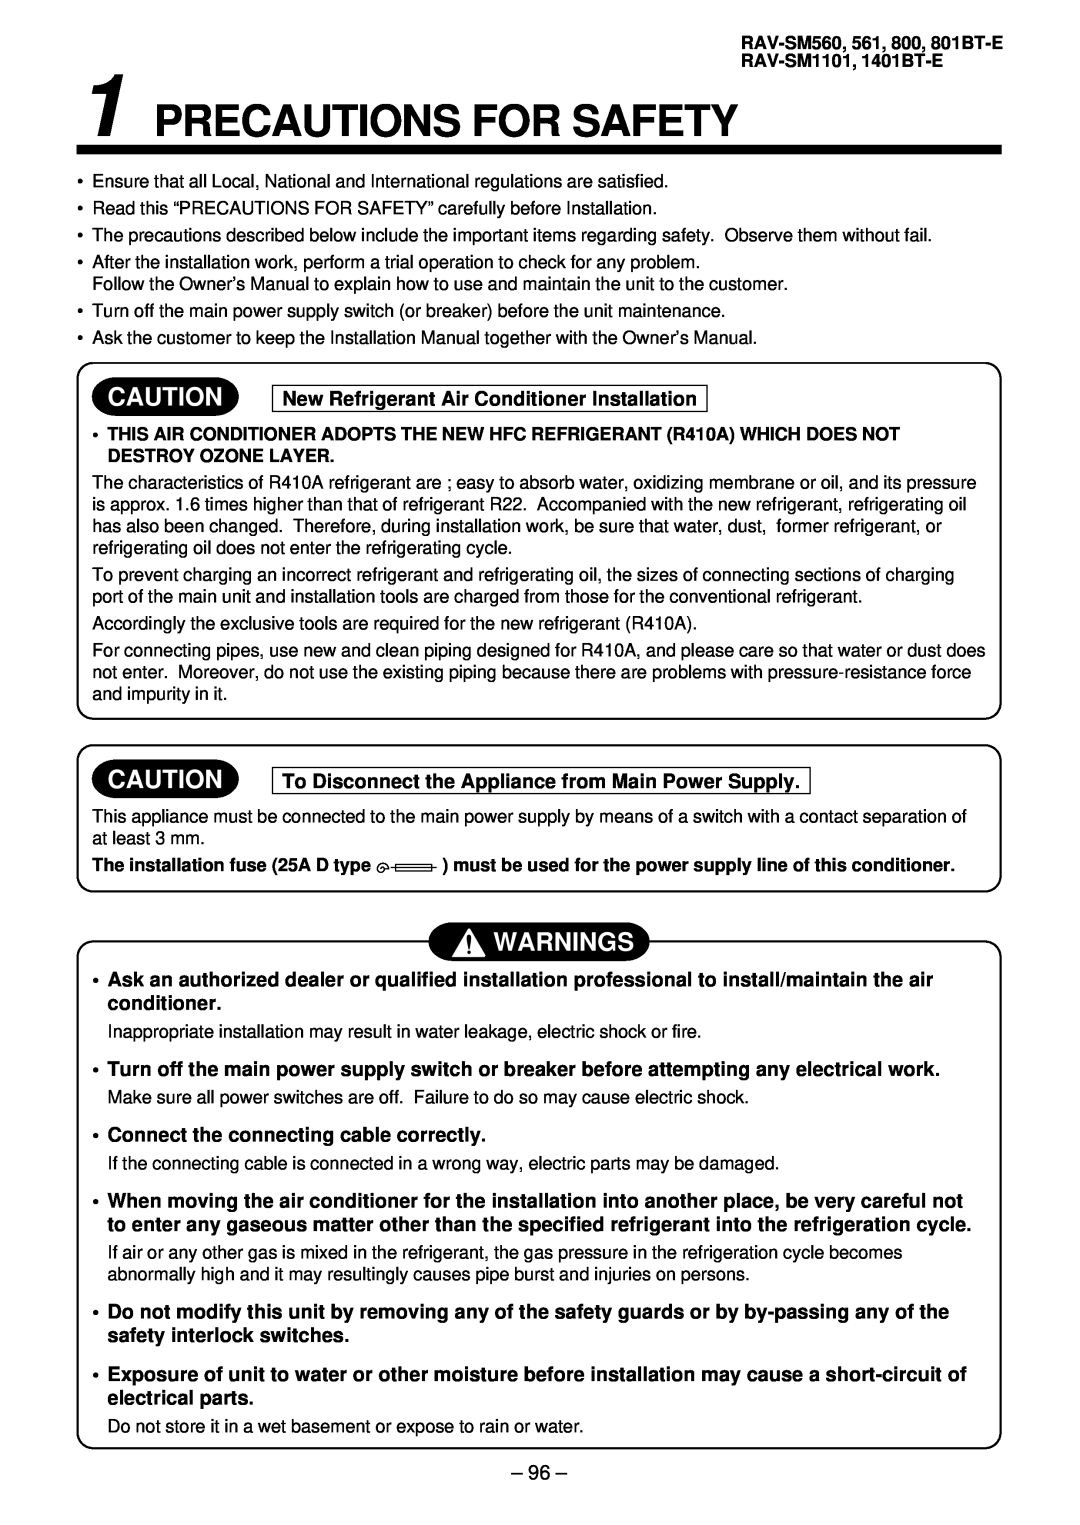 Balcar R410A service manual Precautions For Safety, Warnings, New Refrigerant Air Conditioner Installation 